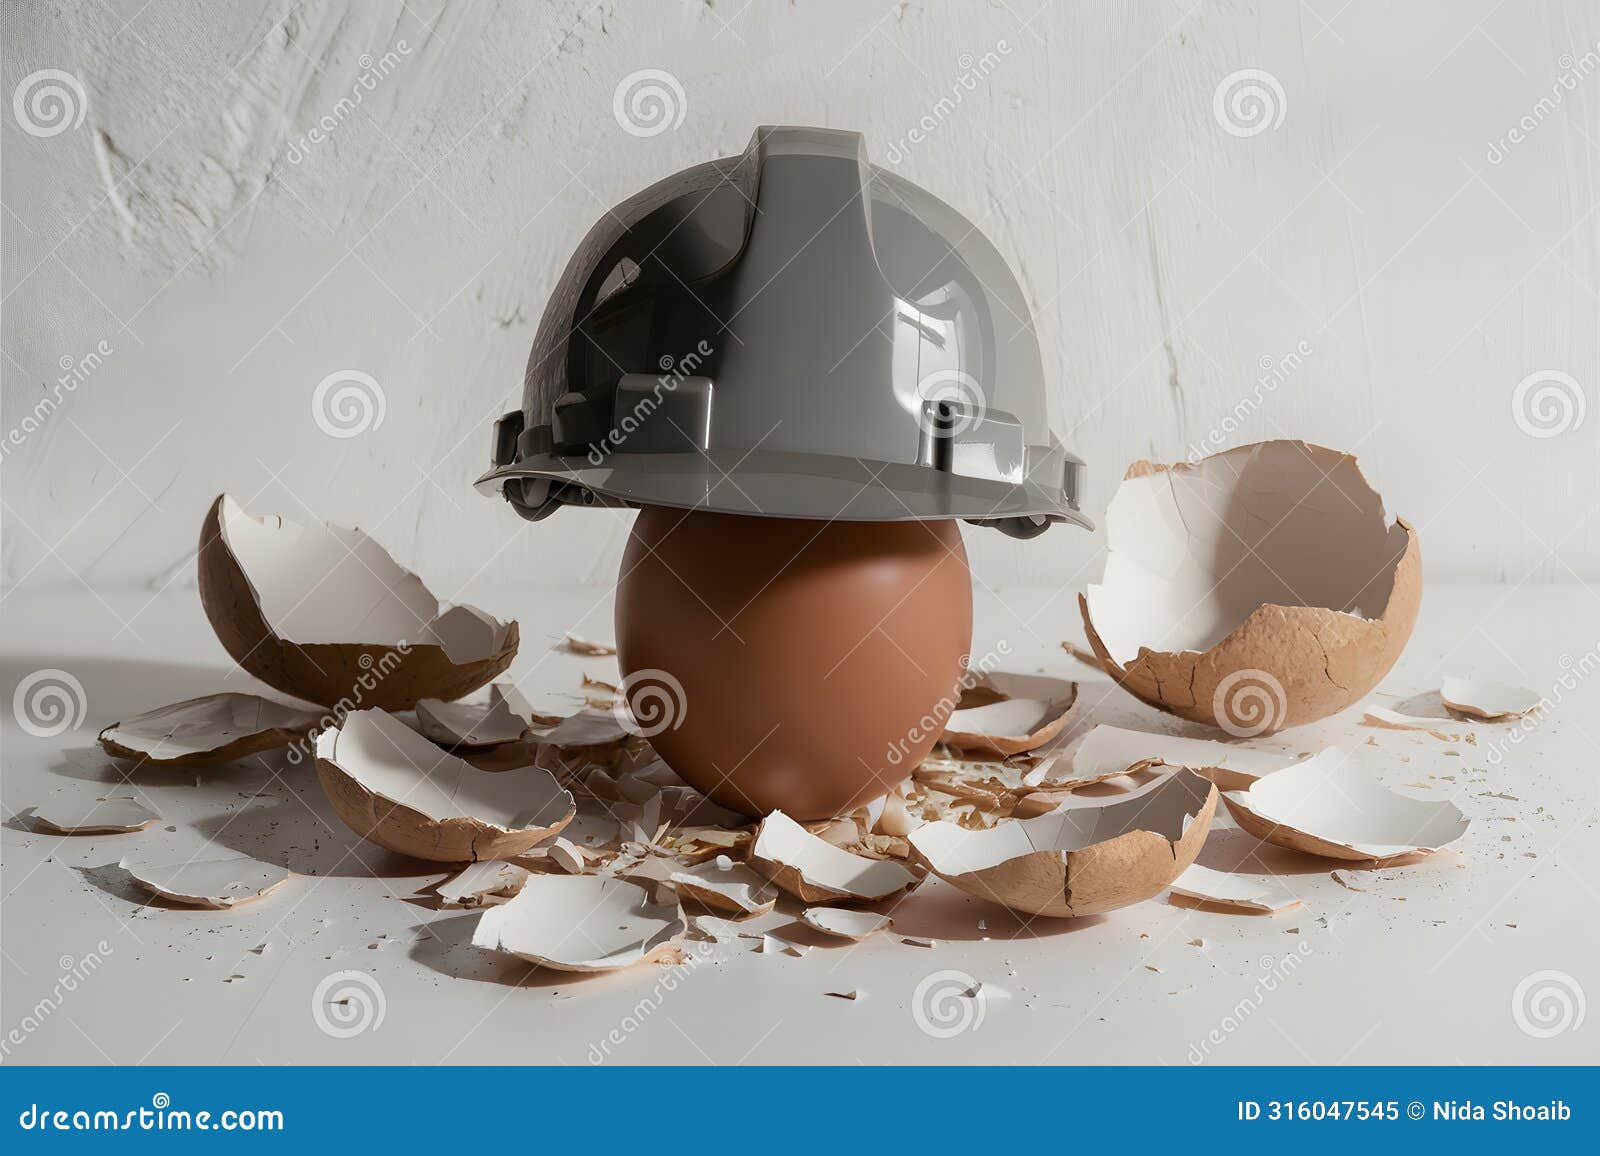 ic image of a hard hat on an egg, representing fragility and safety